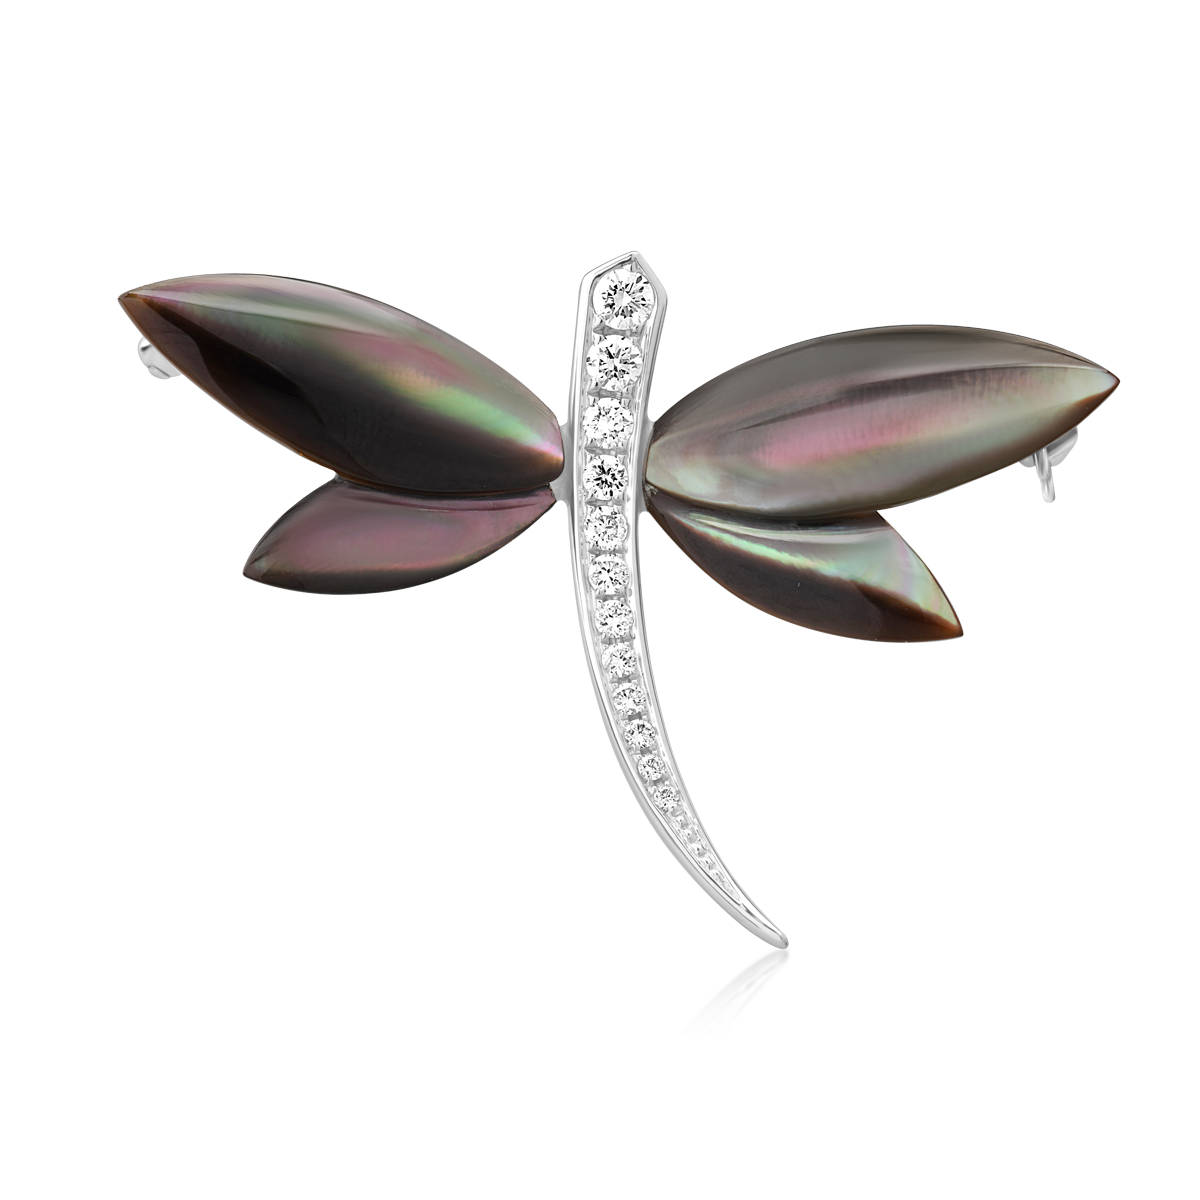 18K white gold brooch with 5.3ct pearl and 0.23ct diamonds